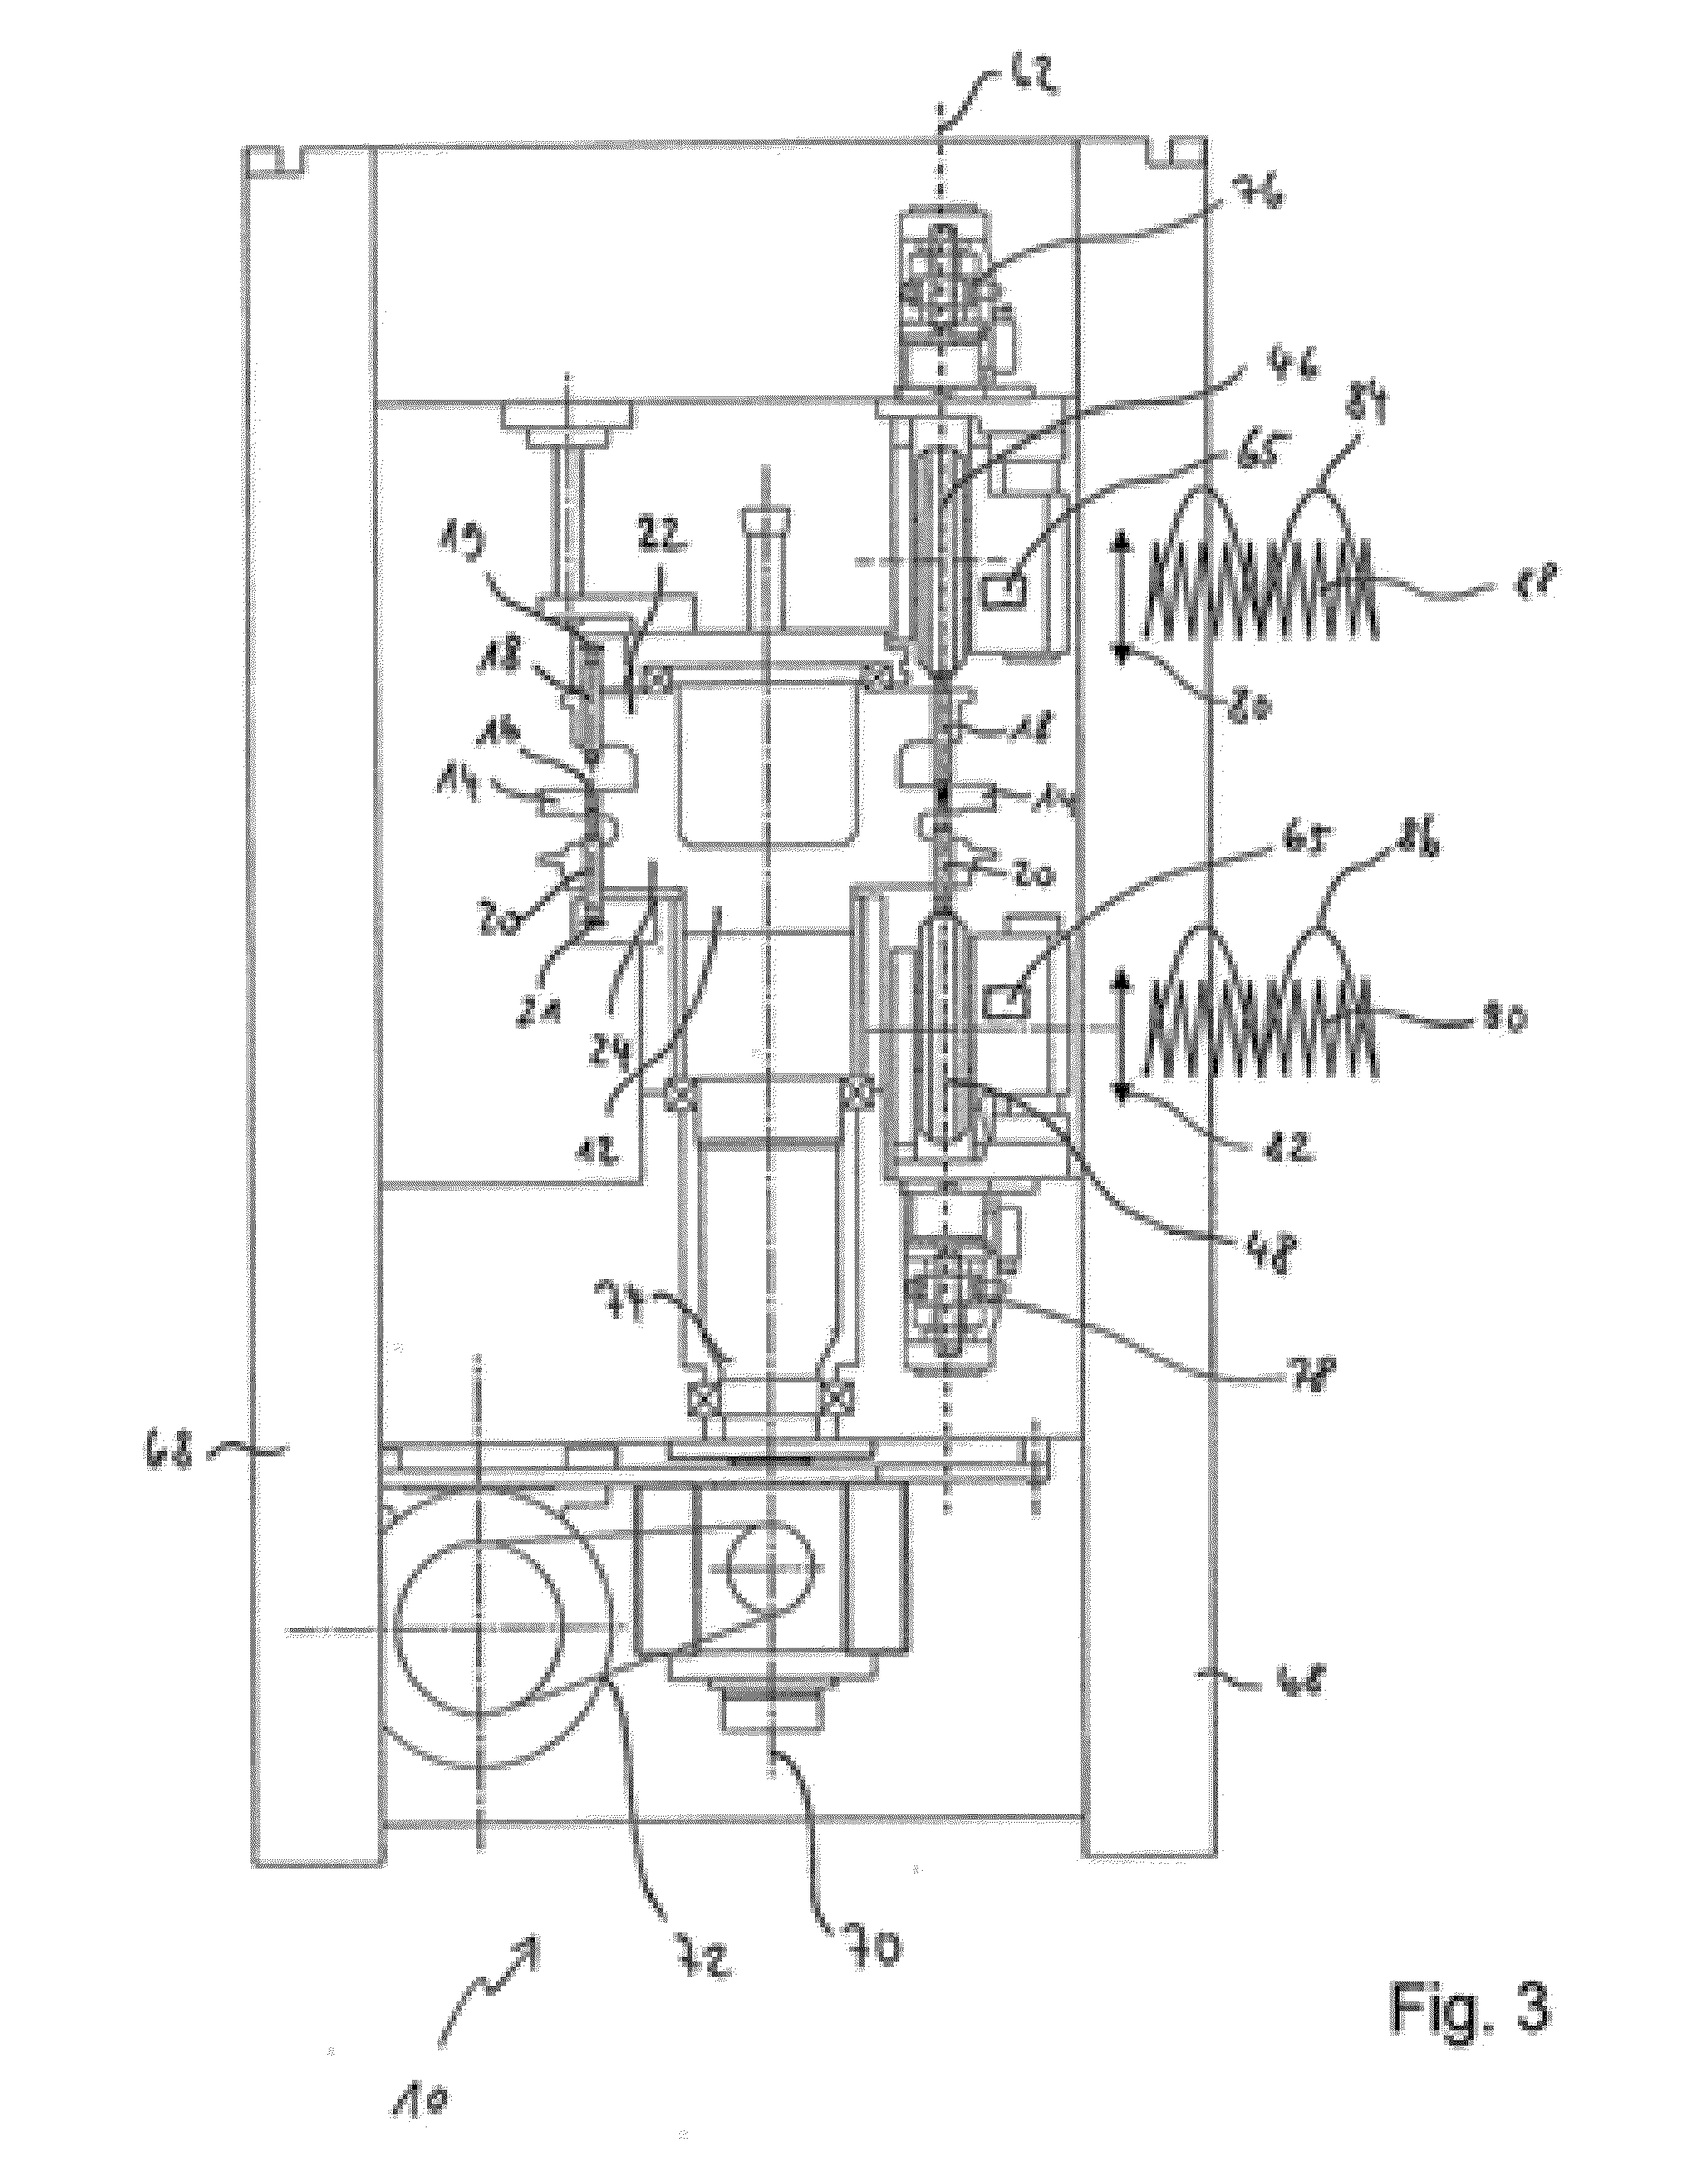 Rotary Tablet Press and Method for Pressing Tablets in a Rotary Tablet Press